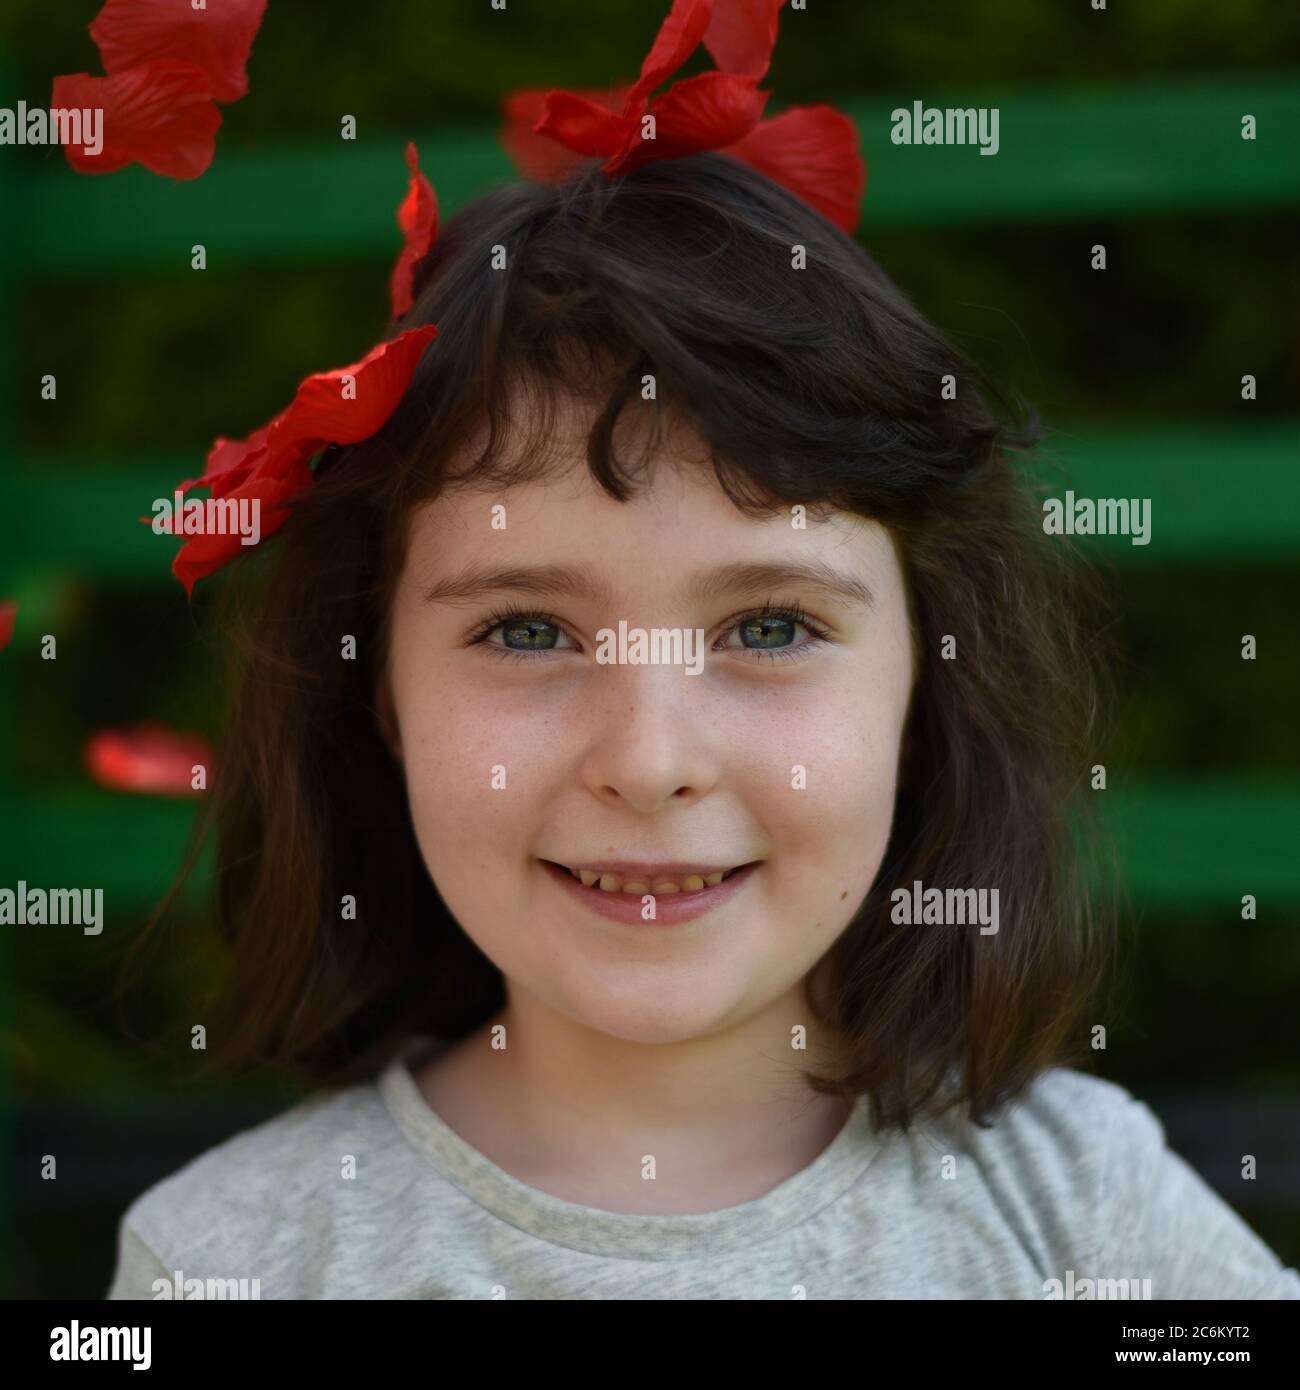 Portrait of little girl among red petals on a dark green background, square image Stock Photo